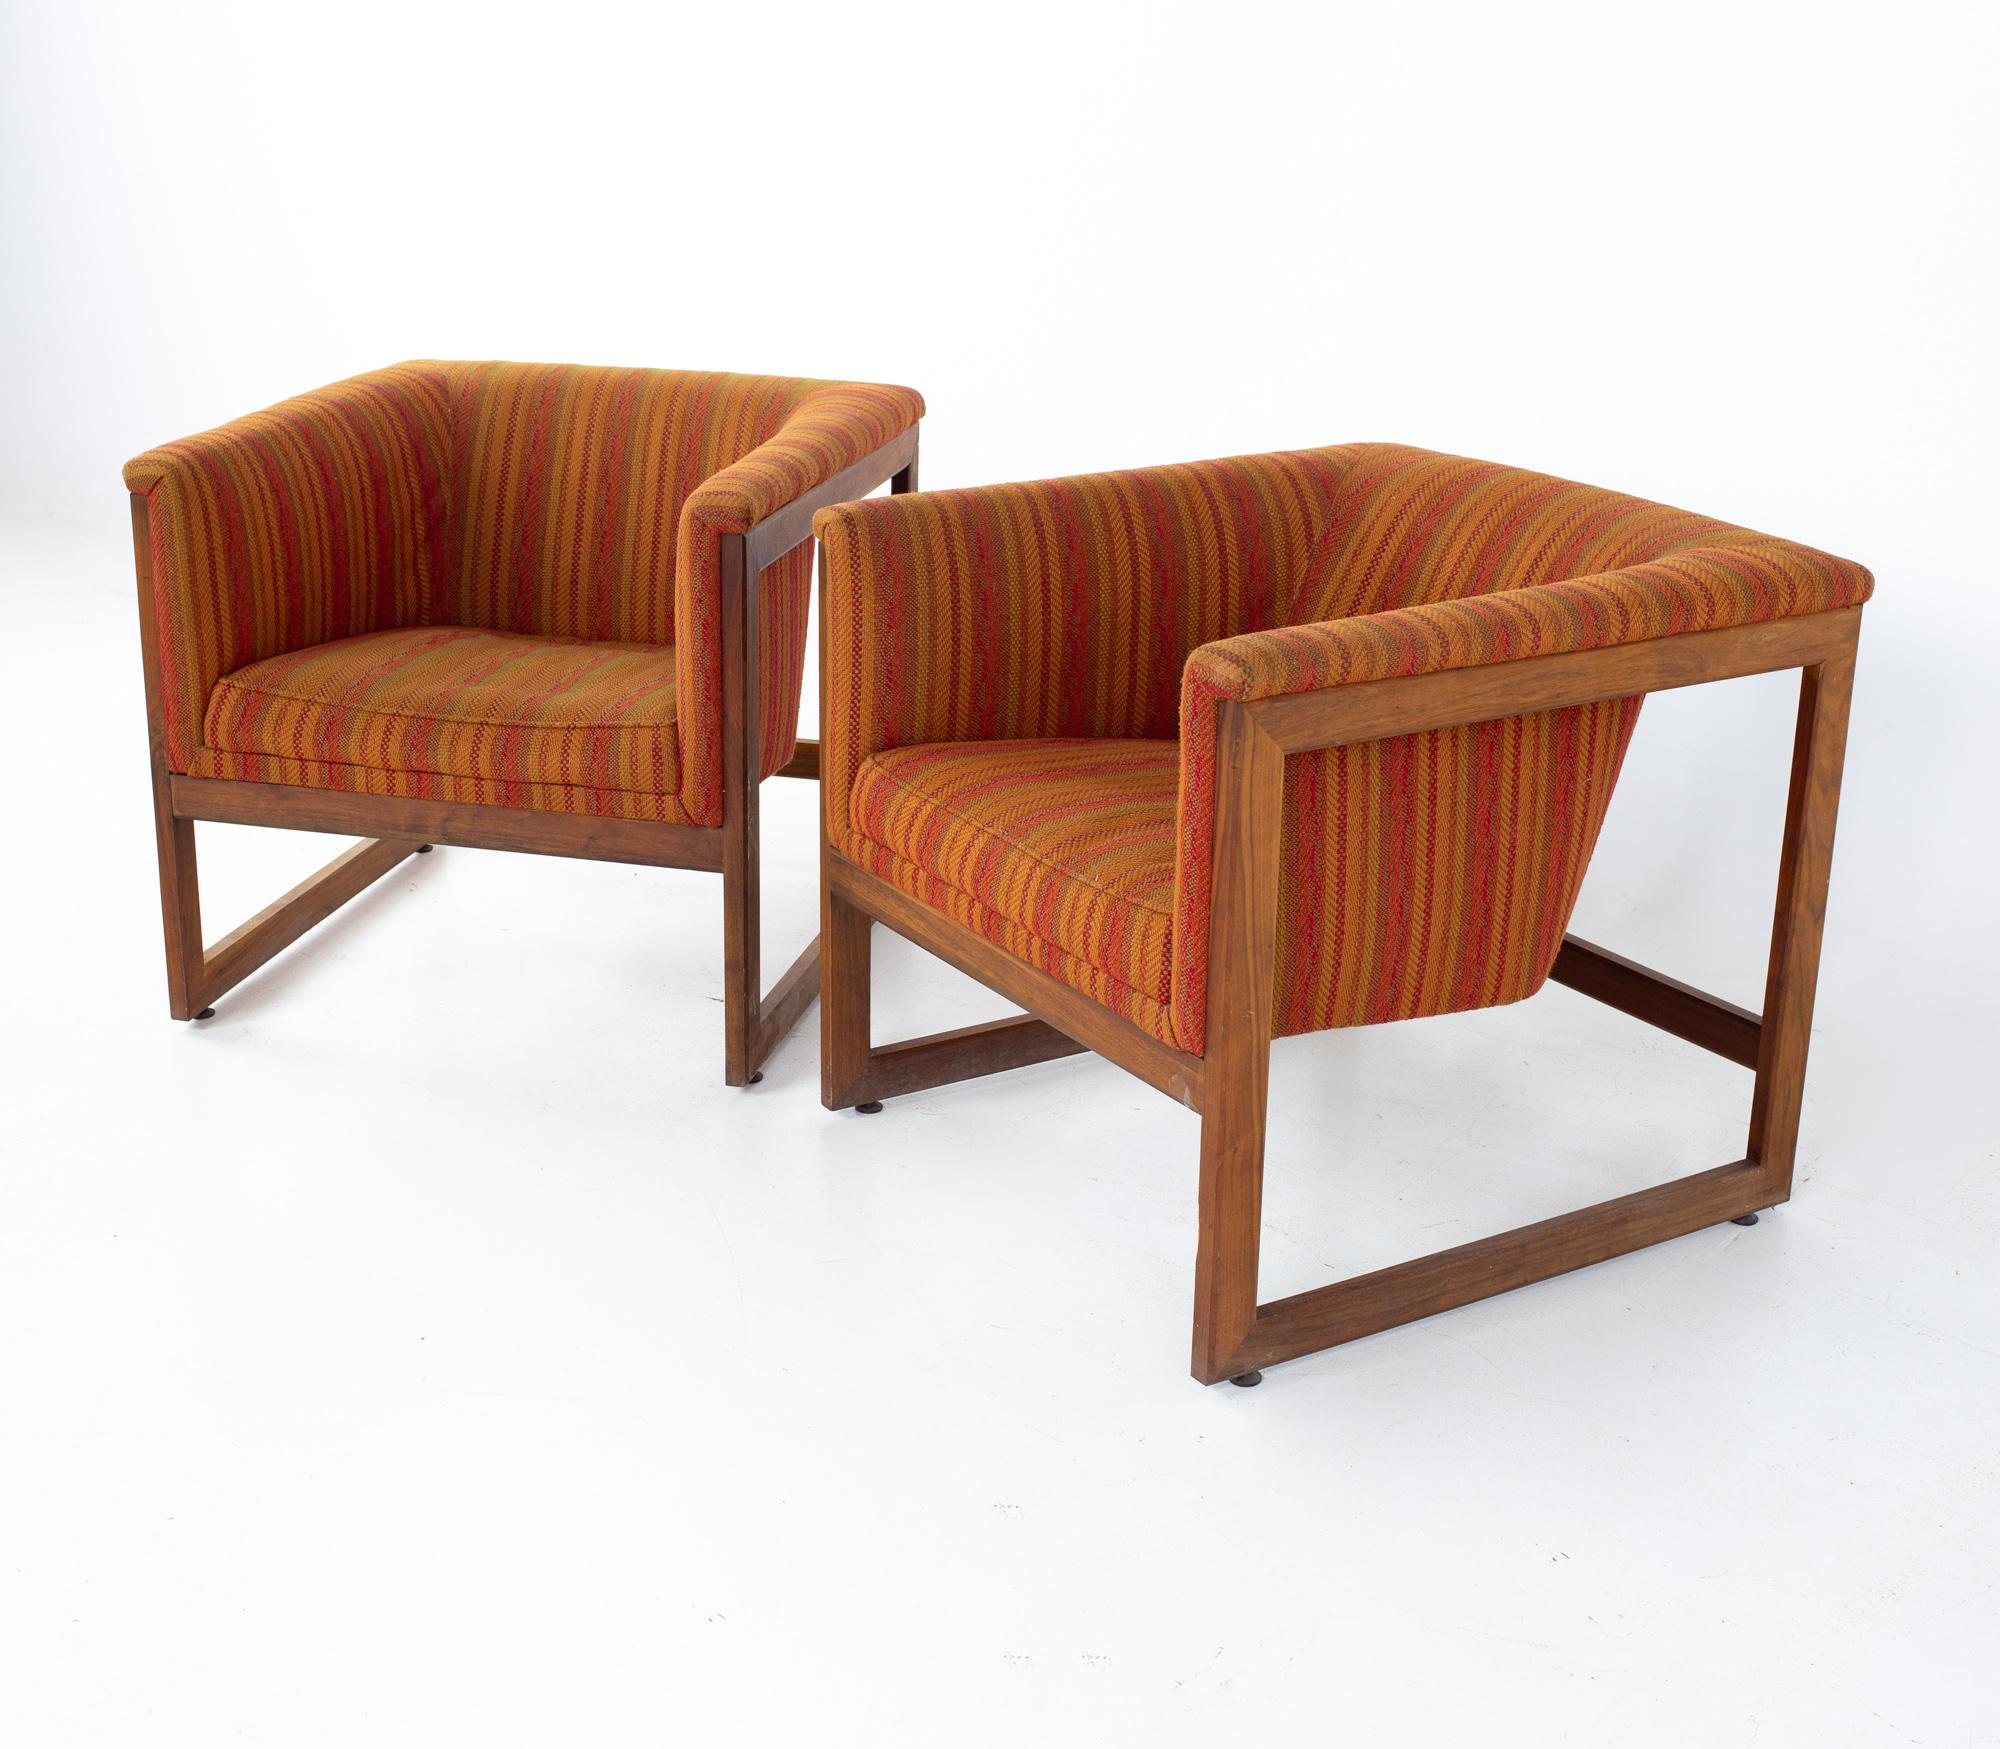 Milo Baughman style mid century monarch floating club cube lounge chairs - a pair
Each chair measures: 27 wide x 28 deep x 25.5 high, with a seat height of 17 inches and an arm height of 25.5 inches

All pieces of furniture can be had in what we